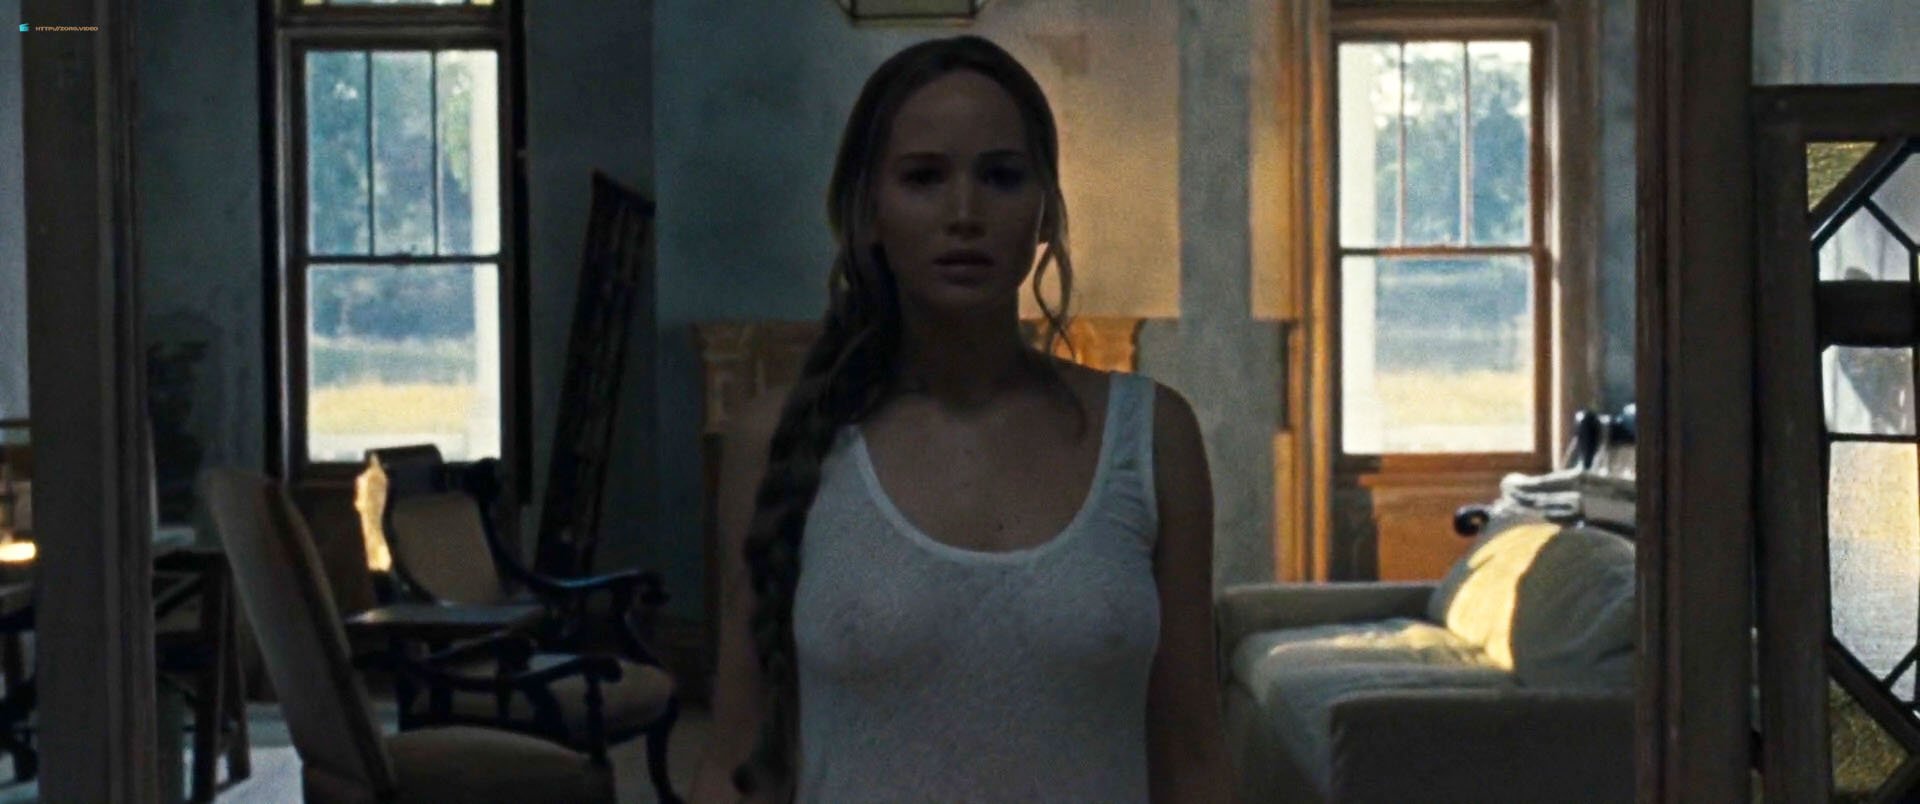 Jennifer lawrence tits in mother